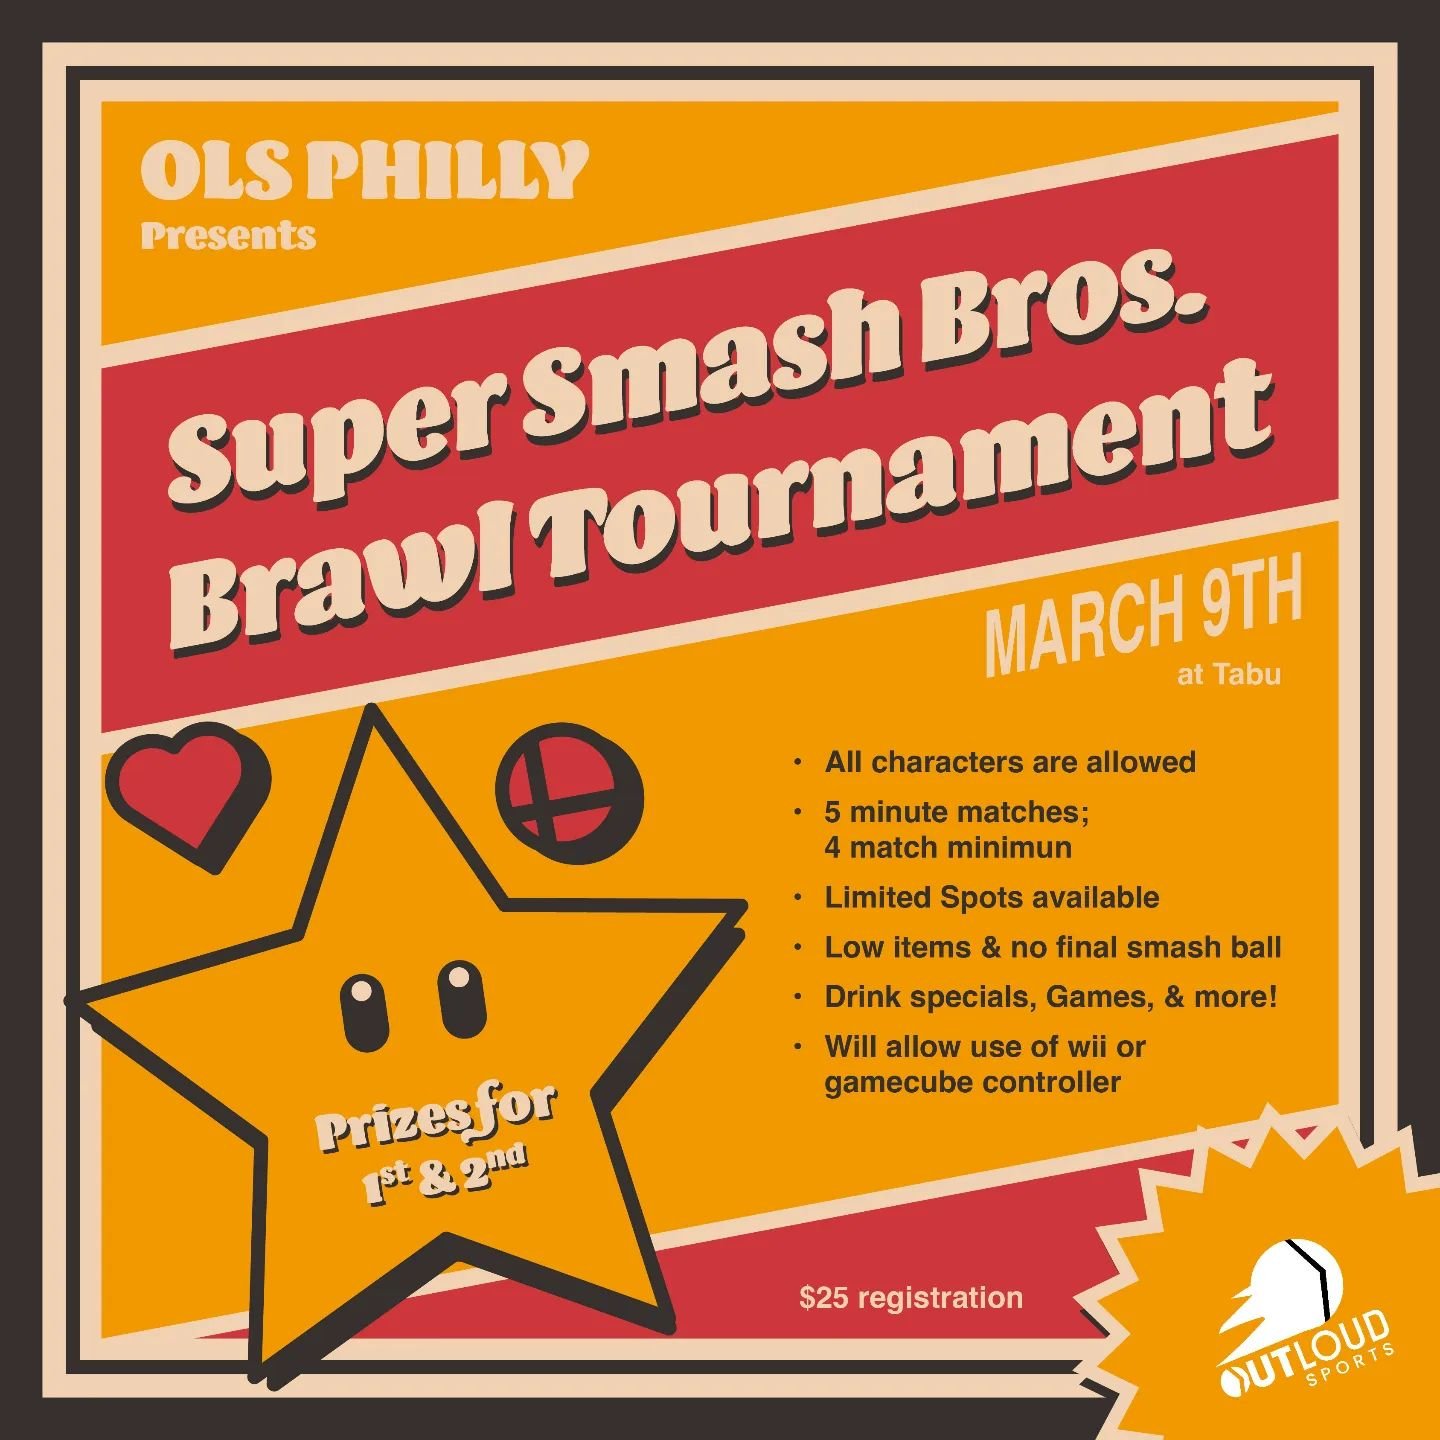 Tomorrow registration opens for our game tournament. It will be a smash bros brawl tournament at tabu! Everyone who registers will get to play a minimum of 4 games through the event! There will be cash prizes for both 1st and second place.

There wil